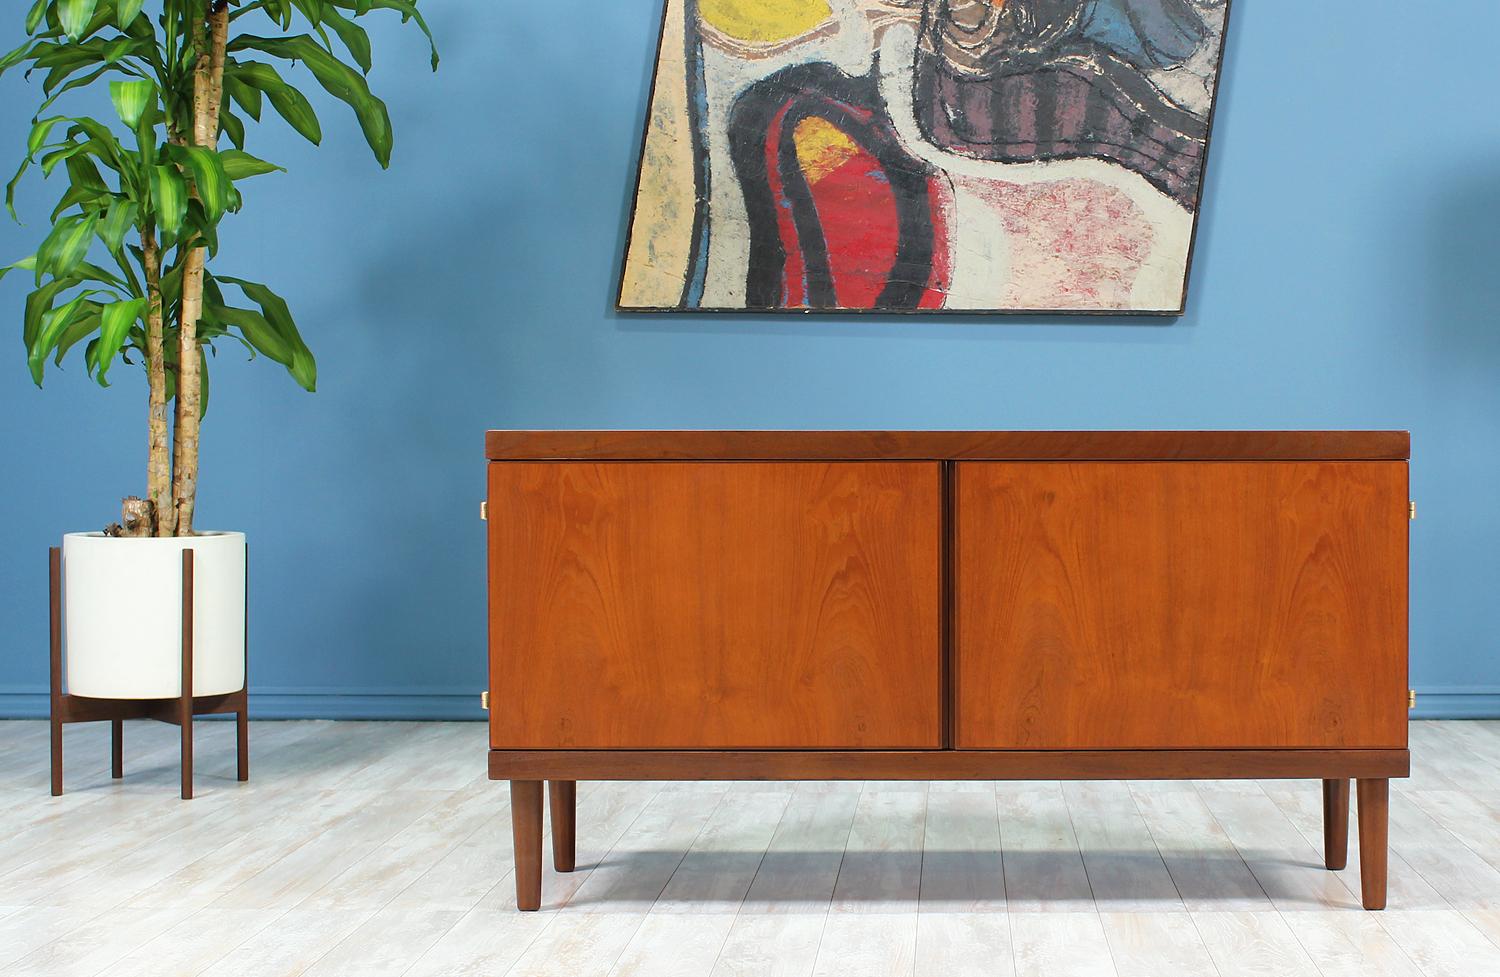 Compact credenza designed by Hans Olsen and manufactured by Hans Olsen Design in Denmark circa 1950’s. This practical credenza features a two-tone teak wood body, with mostly Burma teak and Afromosia teak trimming and tapered legs. This credenza